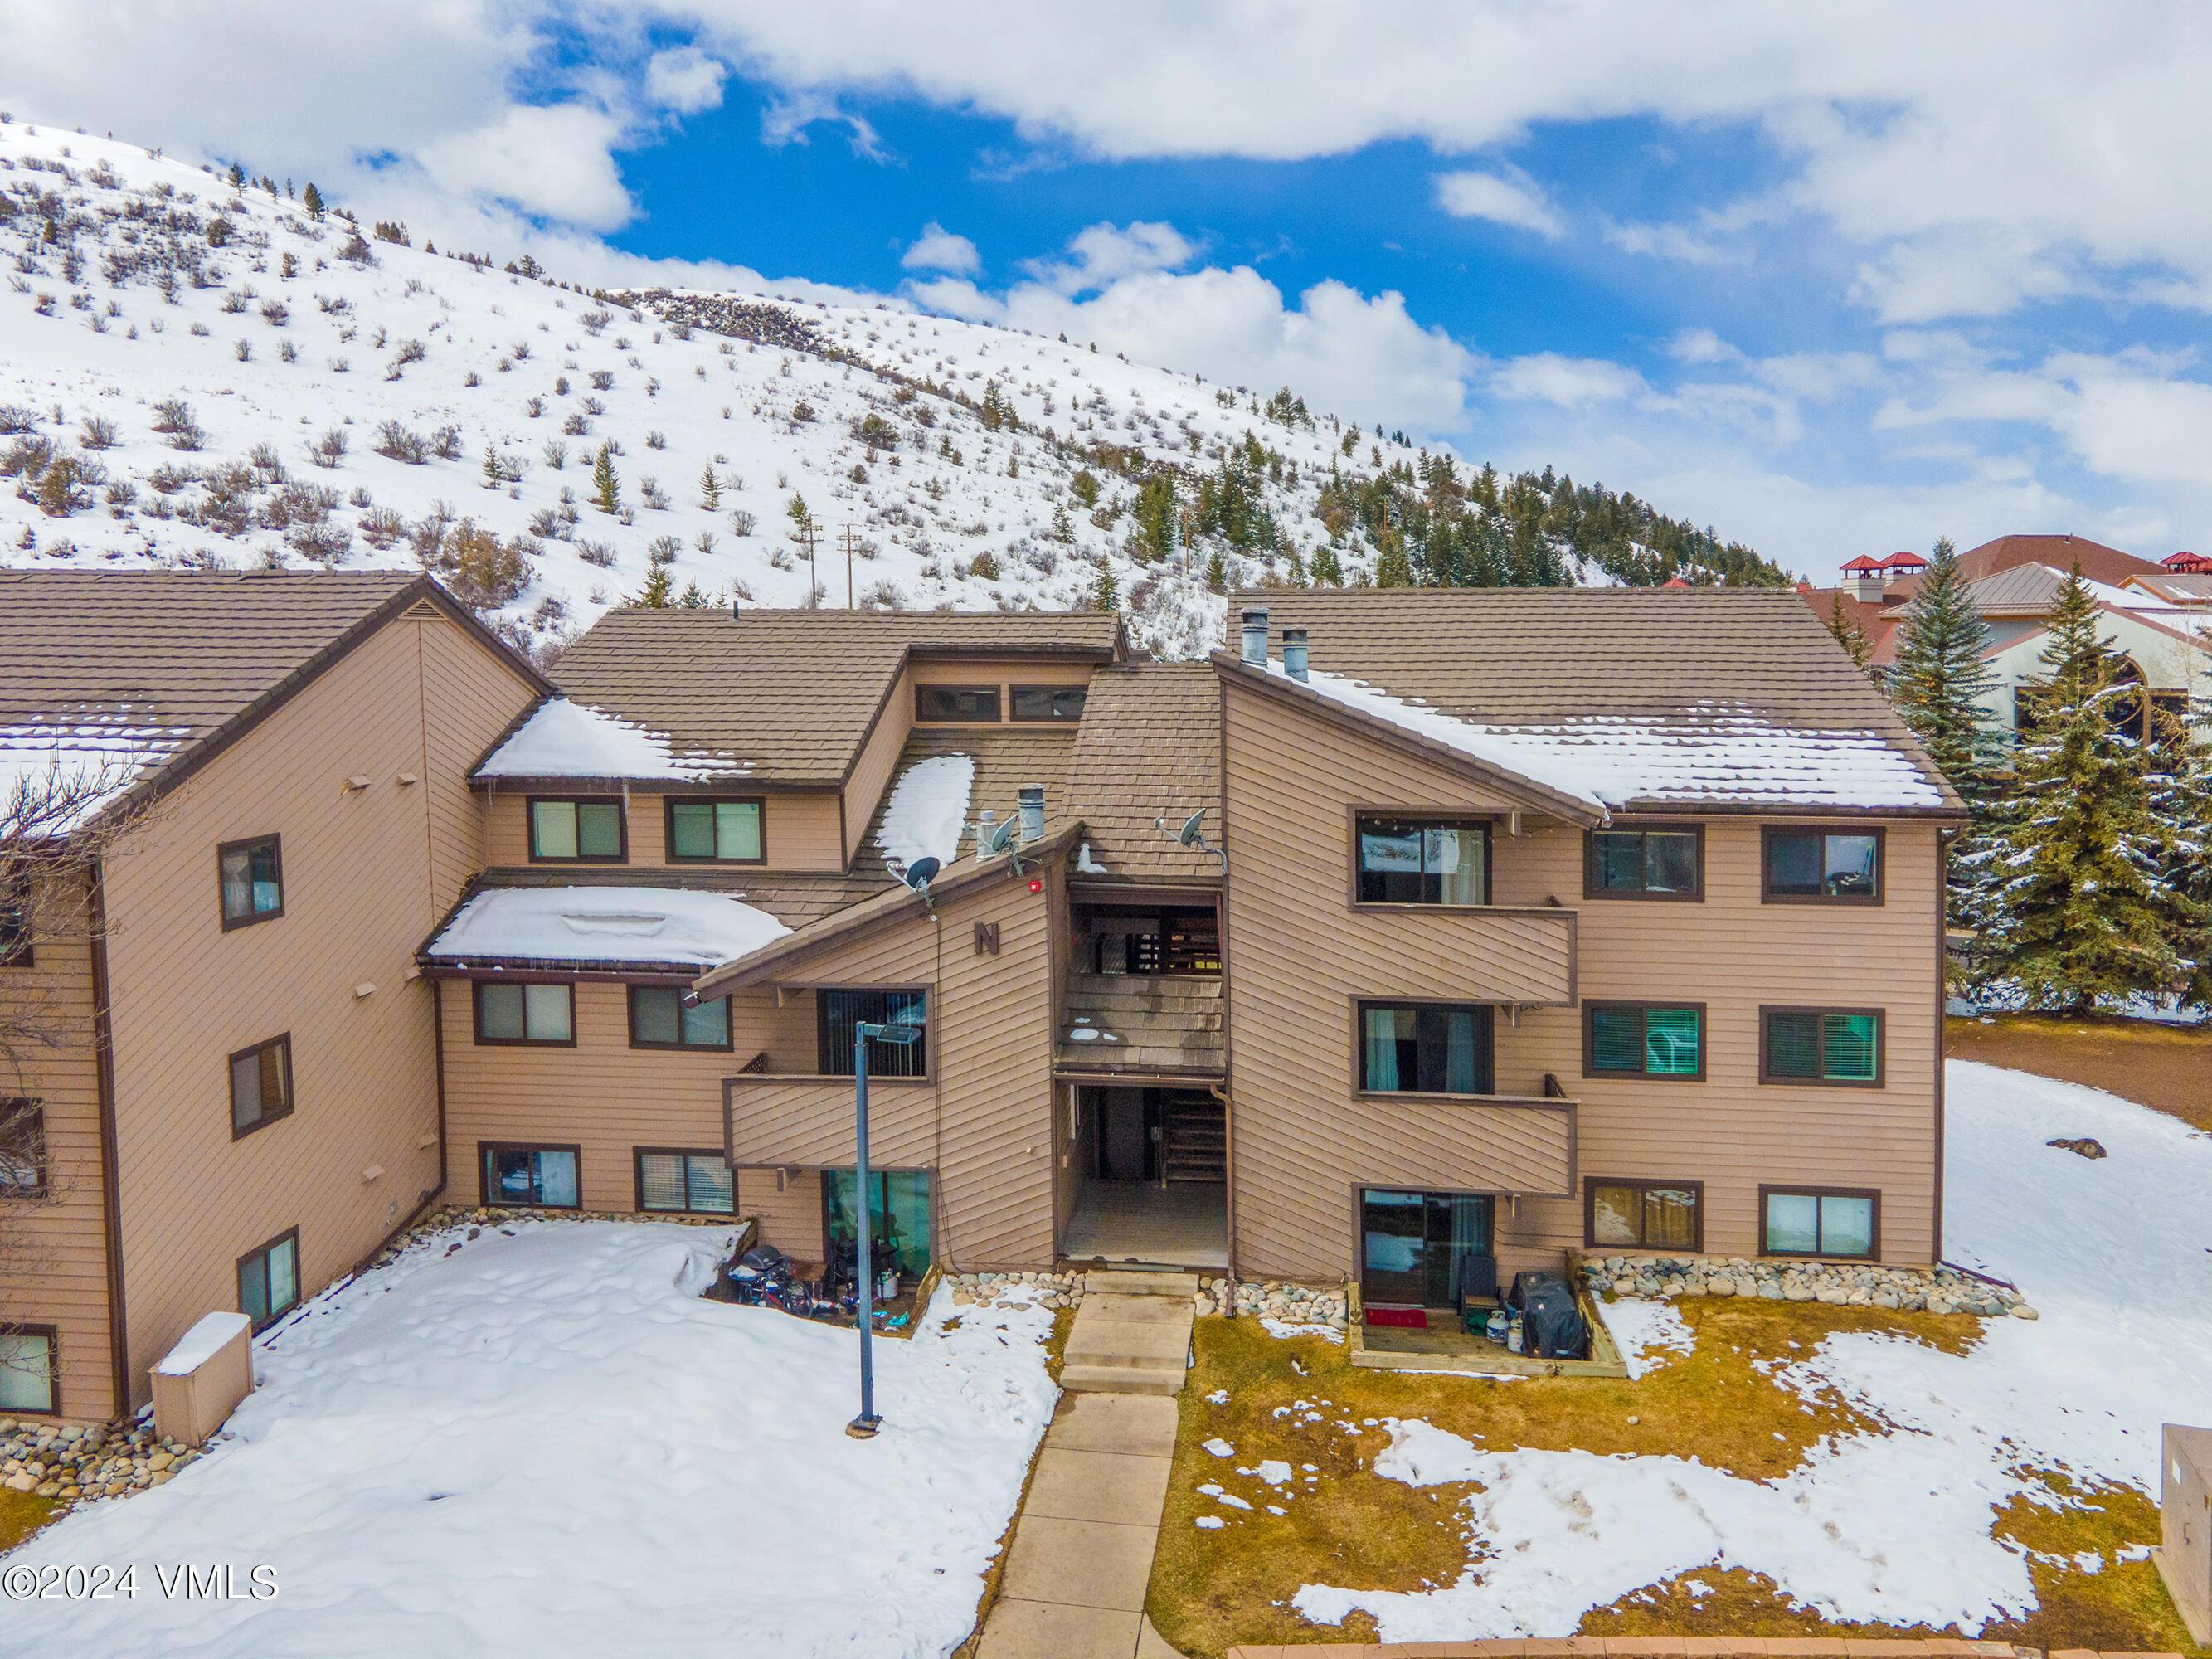 Conveniently nestled across the street from the Bear parking lot for quick access to the free Beaver Creek Ski Resort shuttle, this charming 2 bedroom, 2 bathroom condo showcases a ...